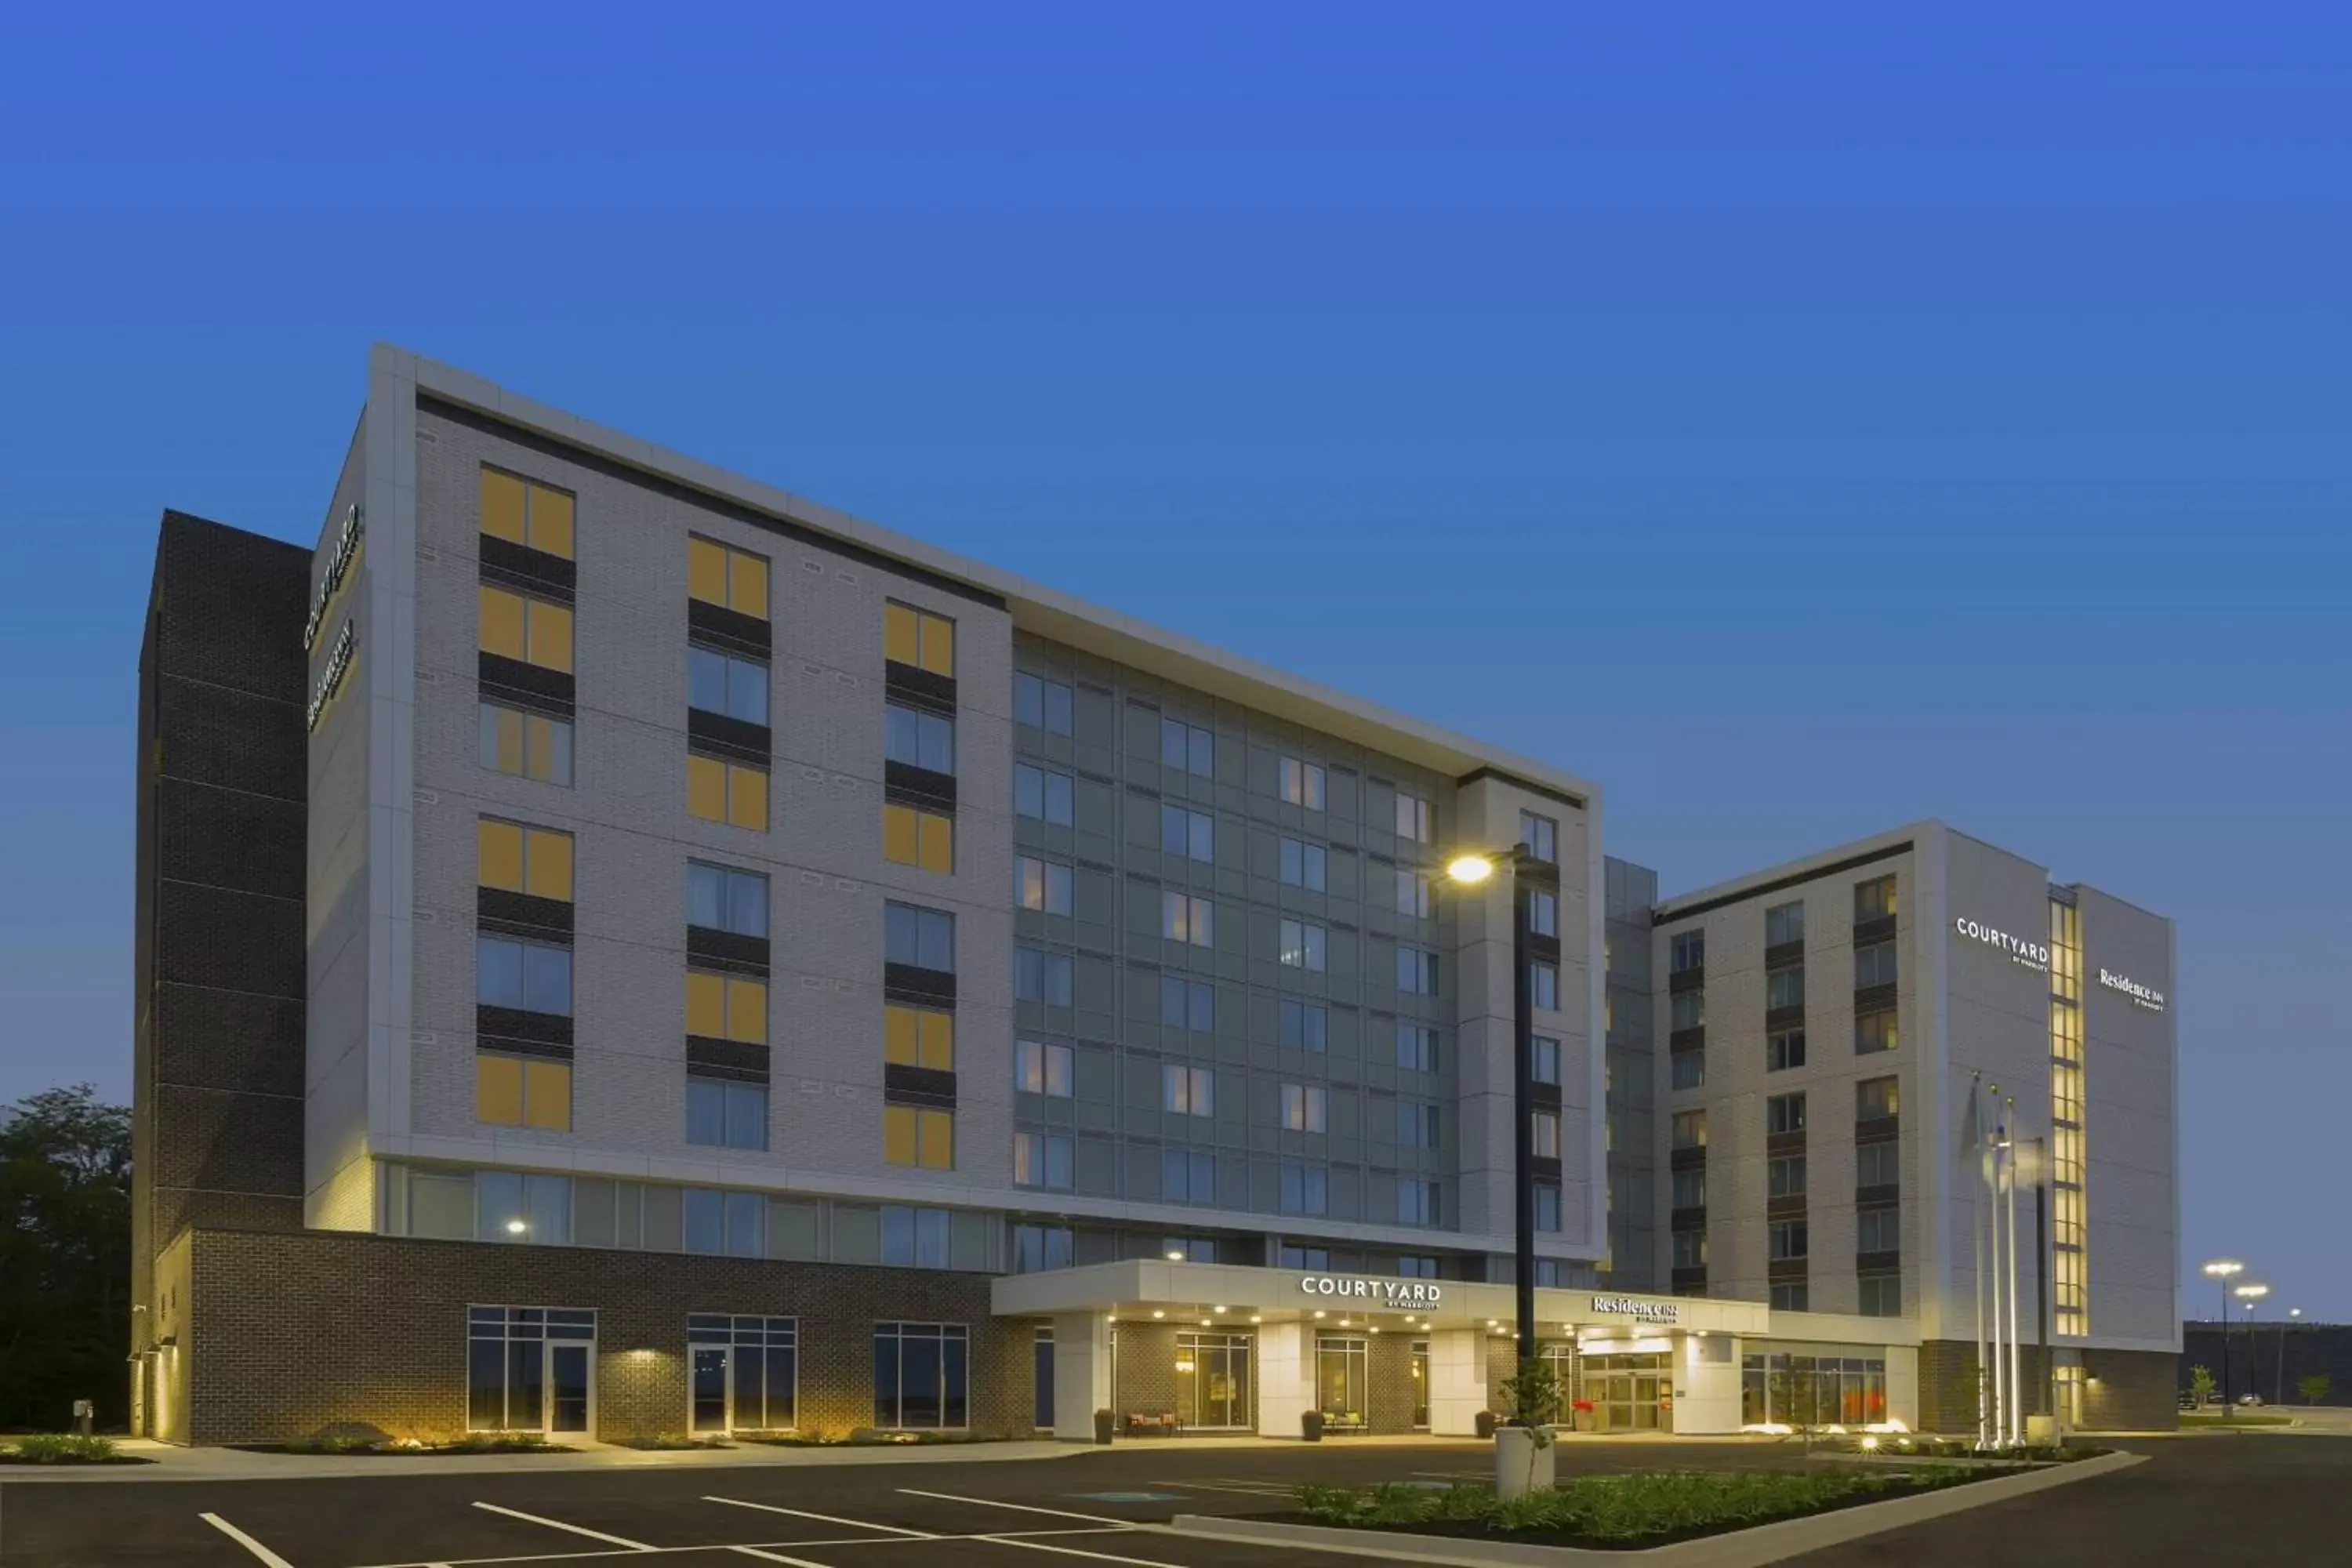 Property Building in Courtyard by Marriott Halifax Dartmouth